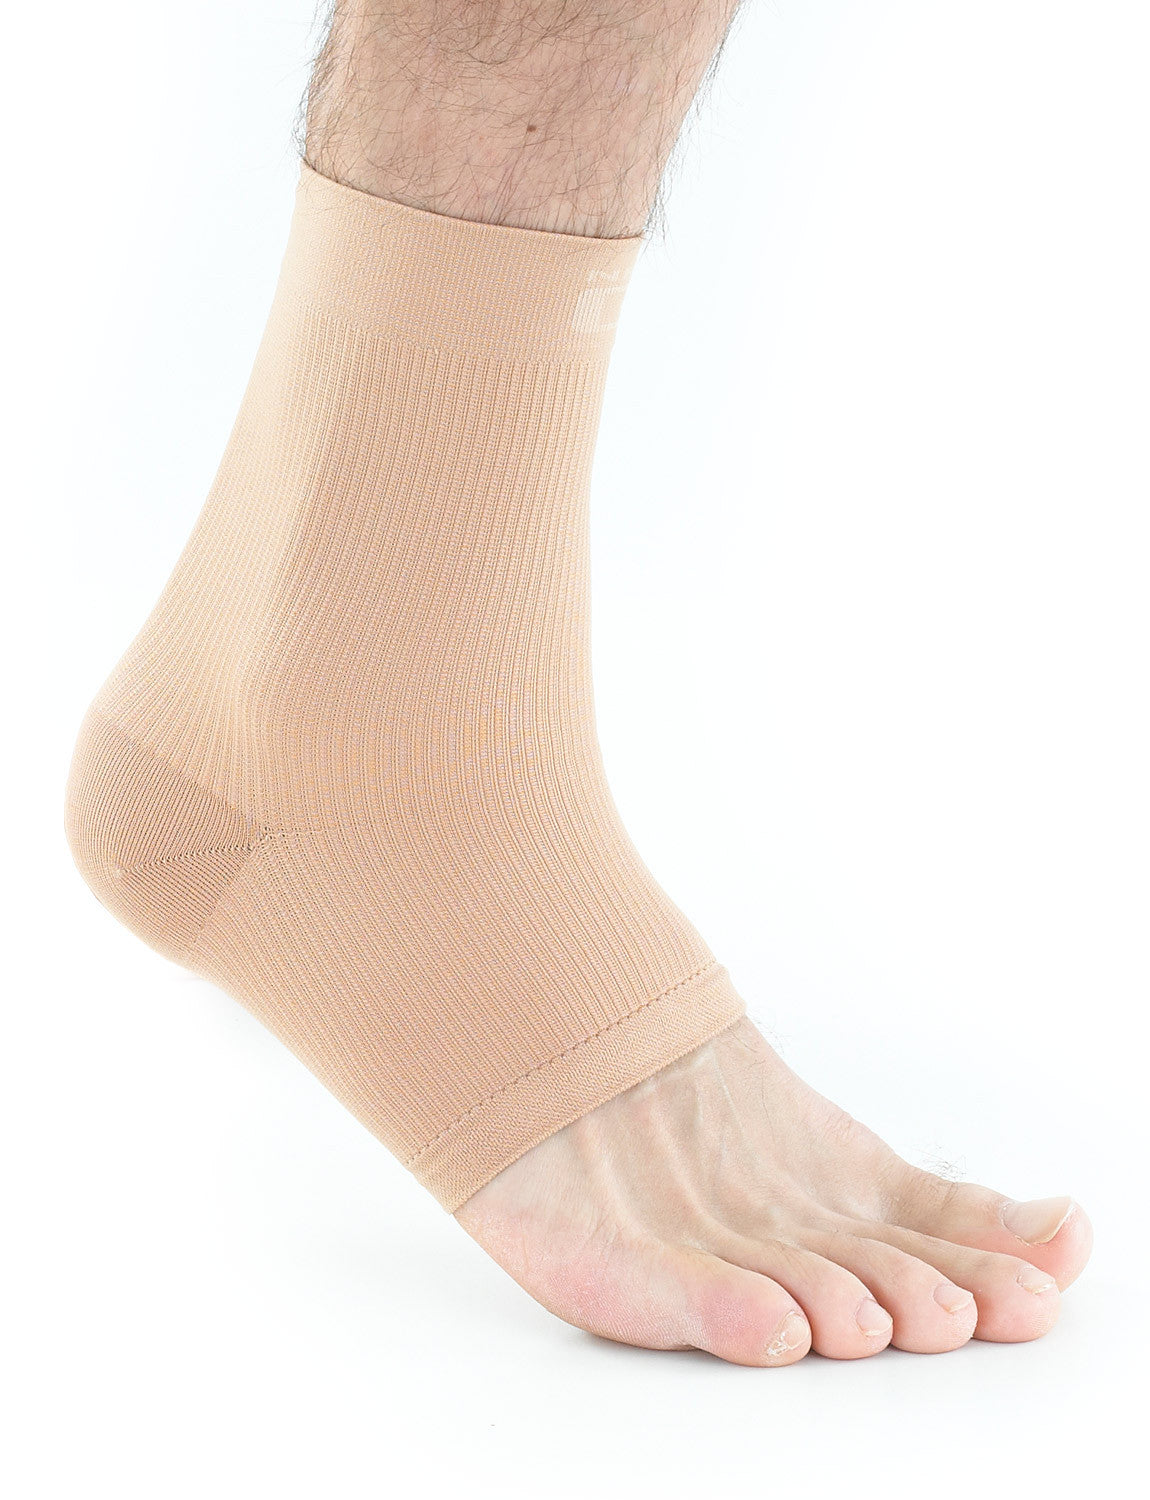 Ankle Support Brace, Airflow Ankle Support